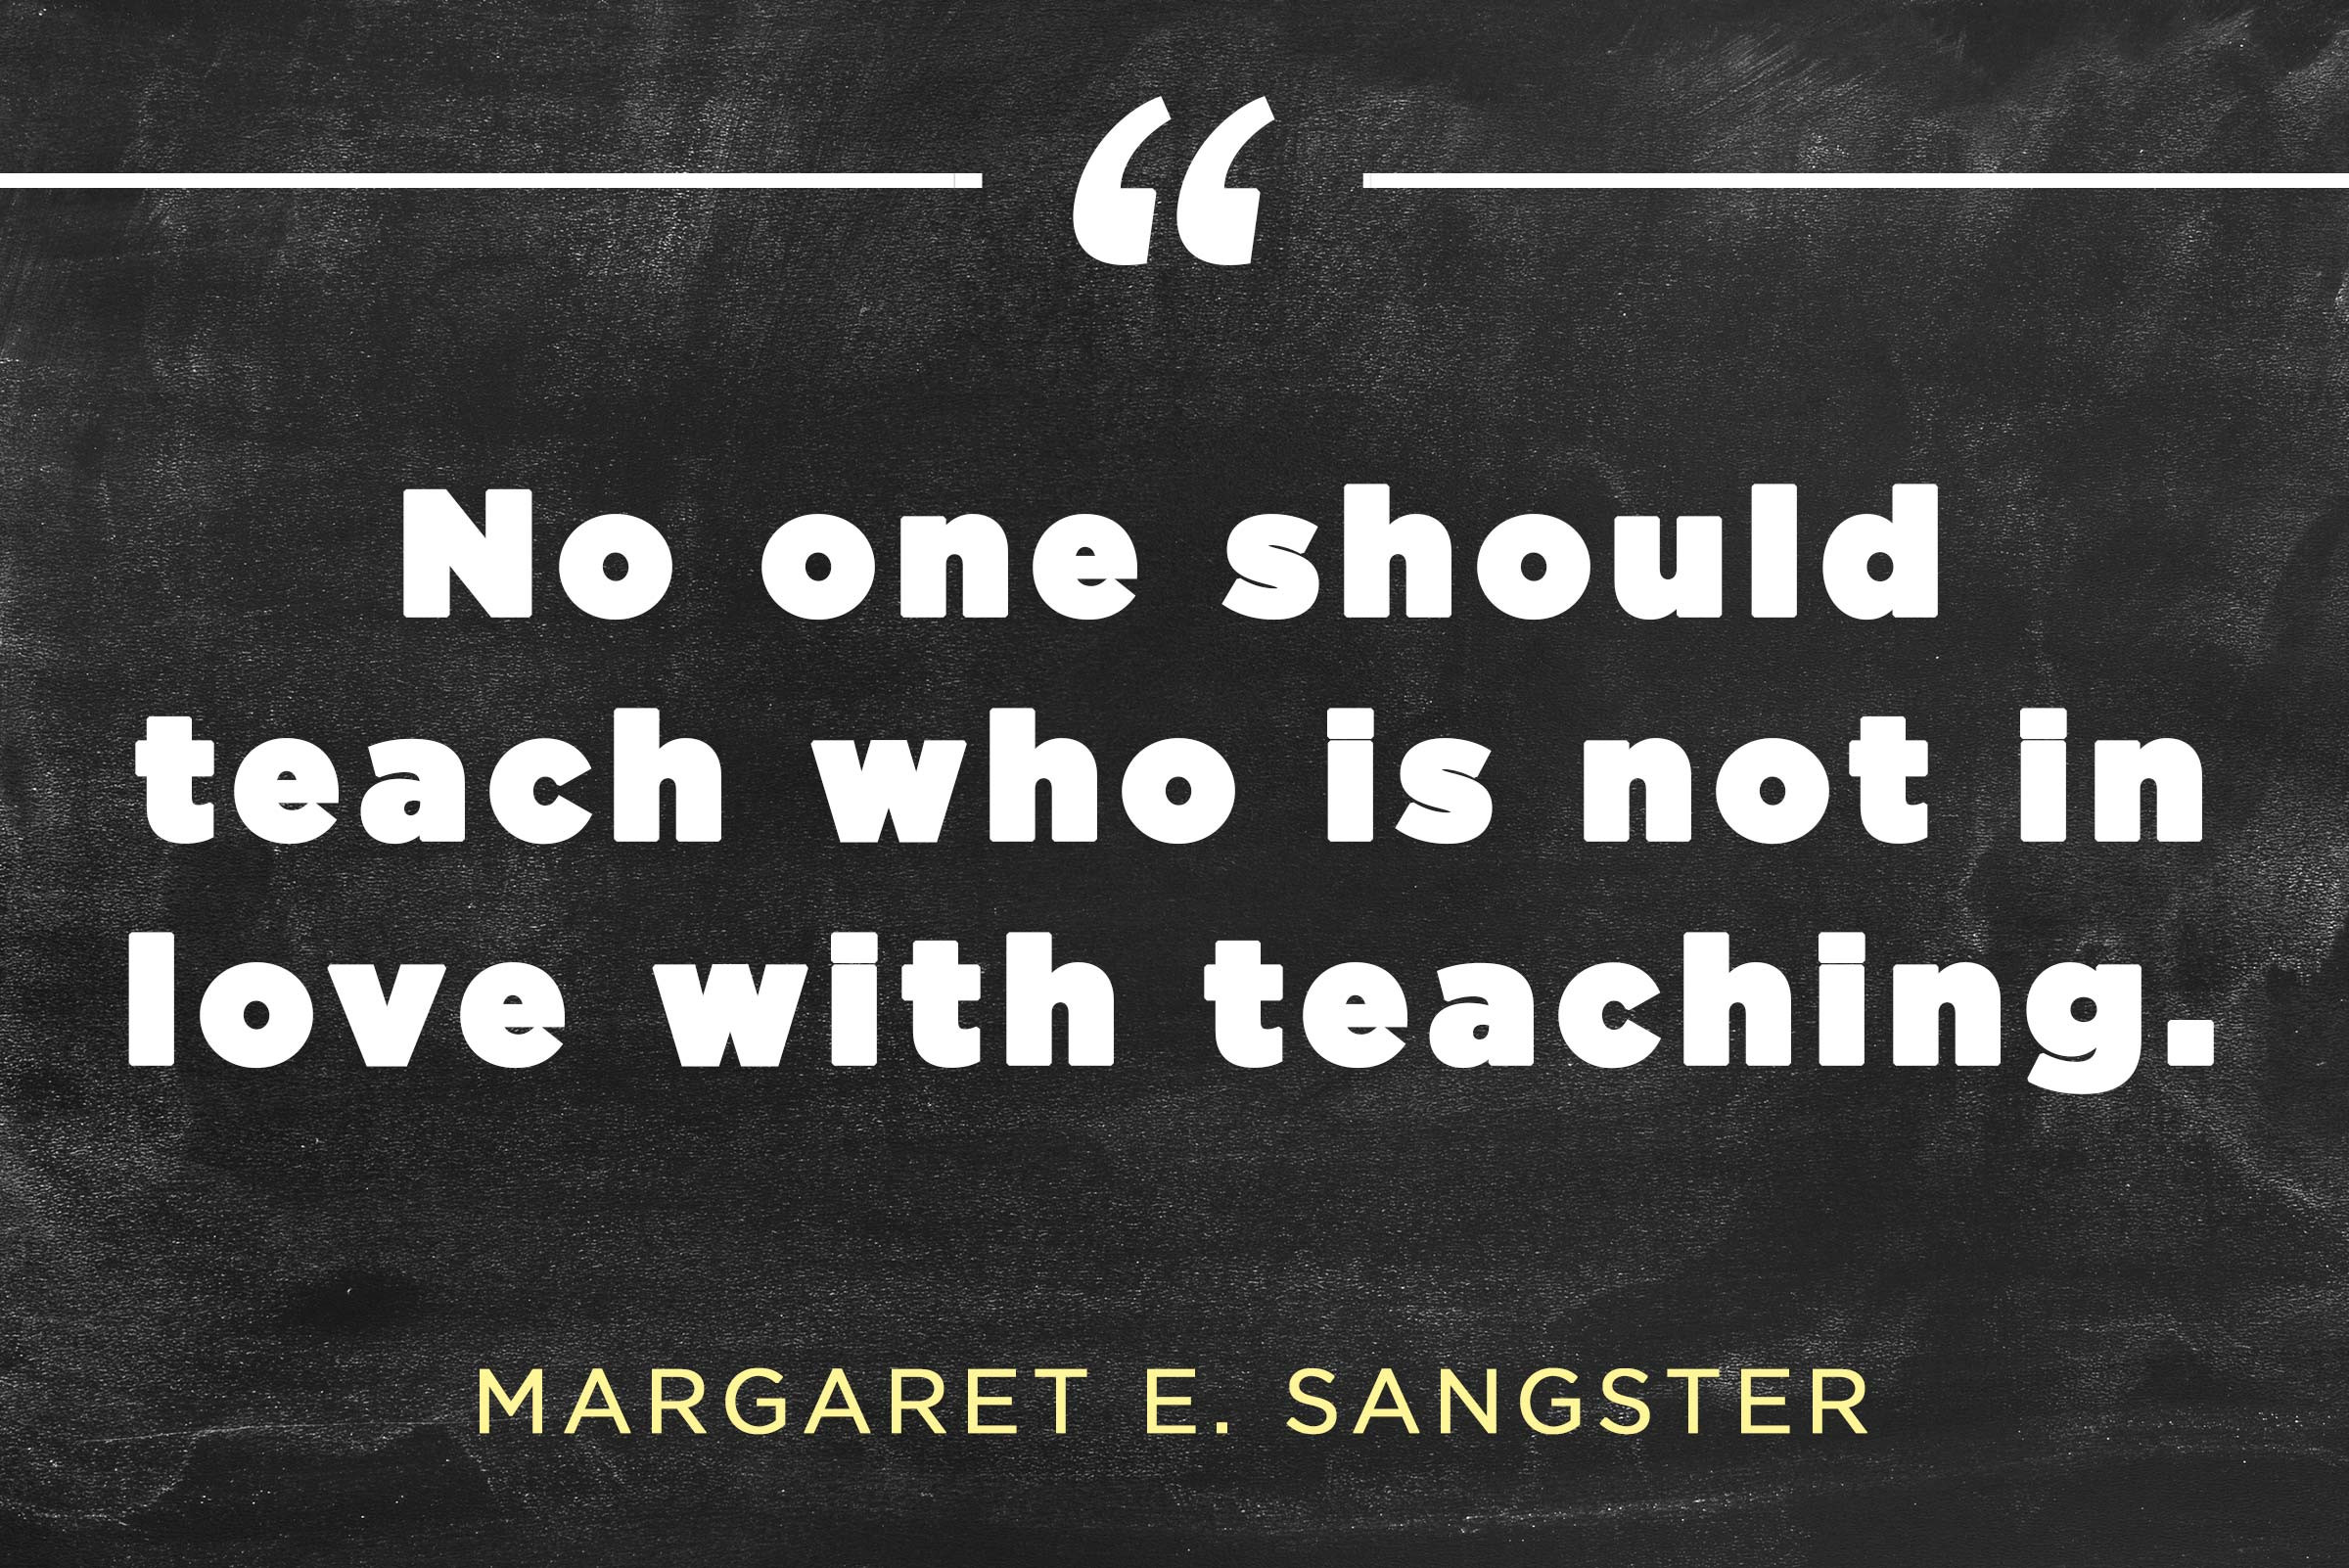 Inspirational Quotes About Teachers
 Inspirational Teacher Quotes